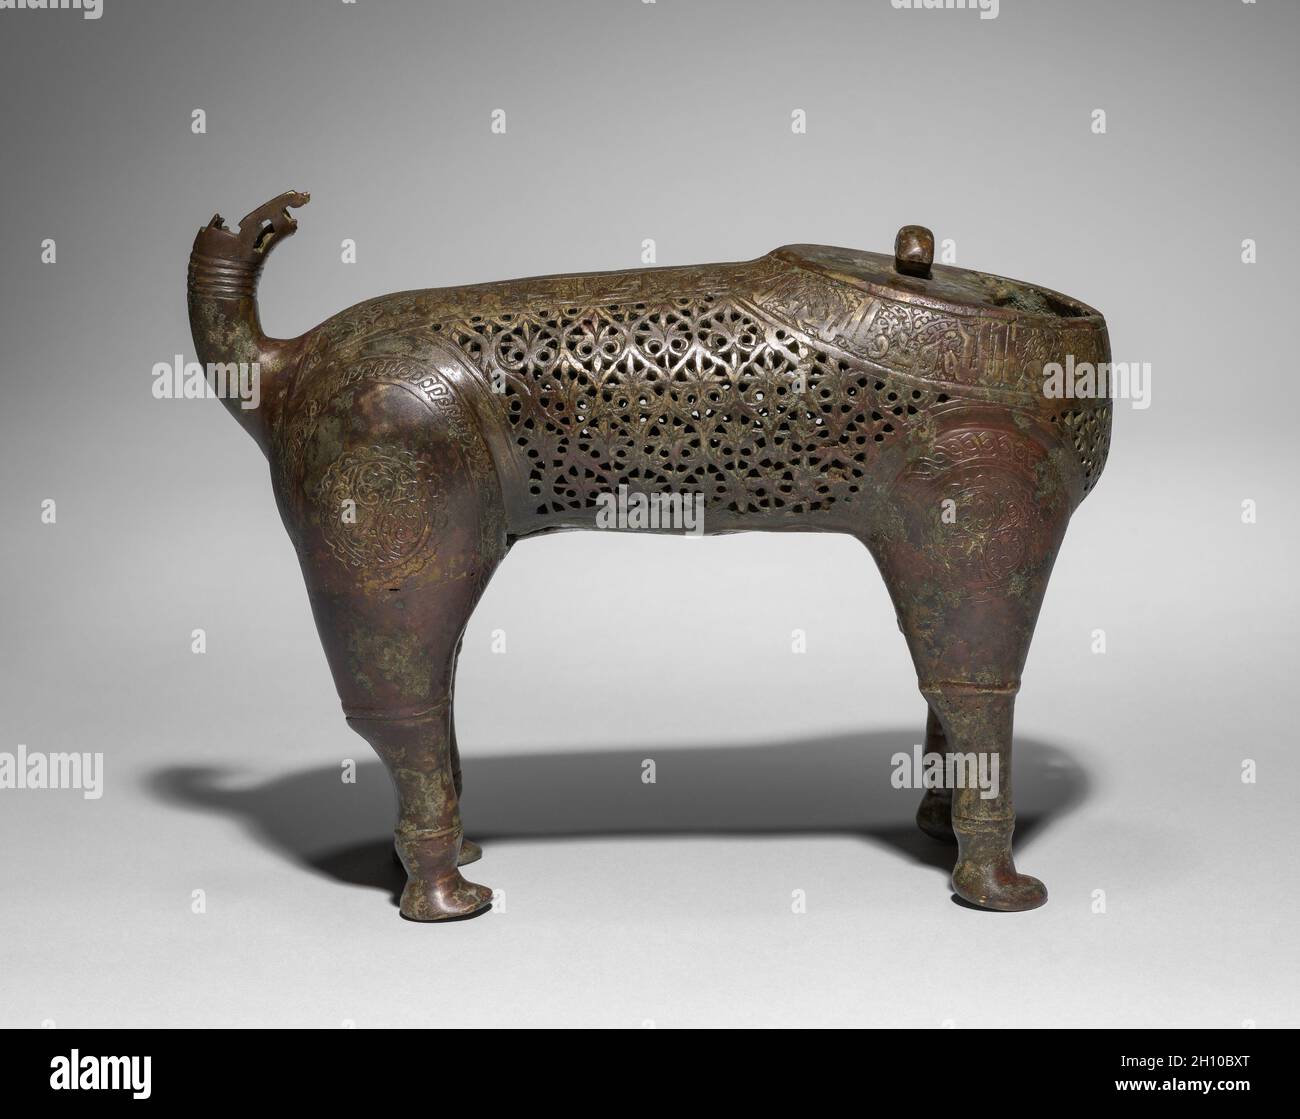 Feline Incense Burner, 1150–1200. Iran, Khurasan, Seljuq period of Iran (1037–1194). Copper alloy, cast, engraved, chased, and pierced; overall: 35.5 x 11 cm (14 x 4 5/16 in.); head: 17.8 x 9.5 x 12.5 cm (7 x 3 3/4 x 4 15/16 in.).  In Iran during the 1000s and 1100s, vessels in the shape of animals gained popularity, especially as incense burners. Felines were favored in Persian art and this piece may represent a caracal, a type of lynx. The head of the creature was cast separately and is removable to fill its body with hot coals and incense. Qur’anic verses on the neck and spine remind worshi Stock Photo